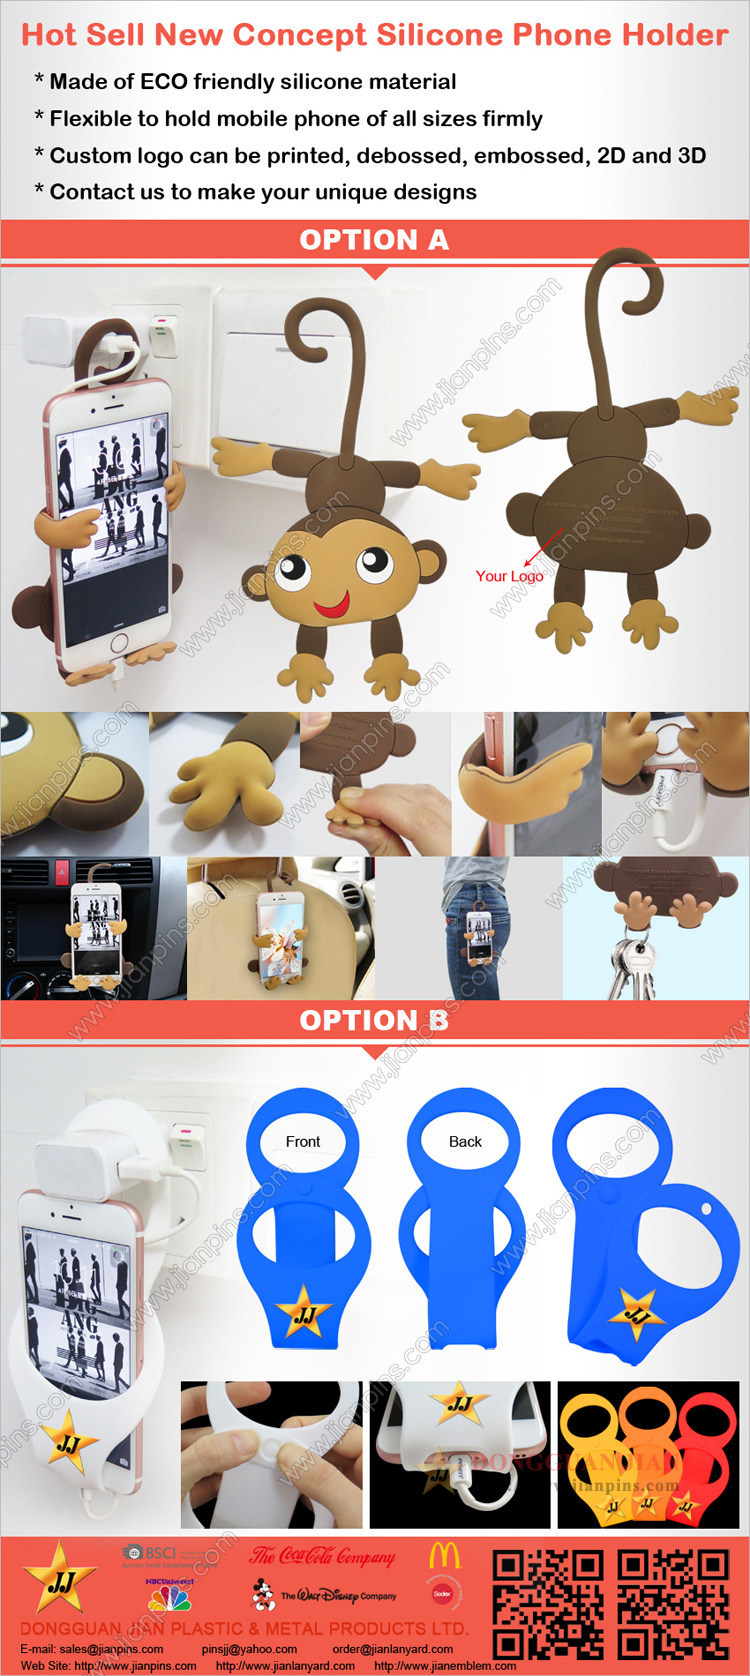 Hot Selling New Concept Silicone Phone Holder